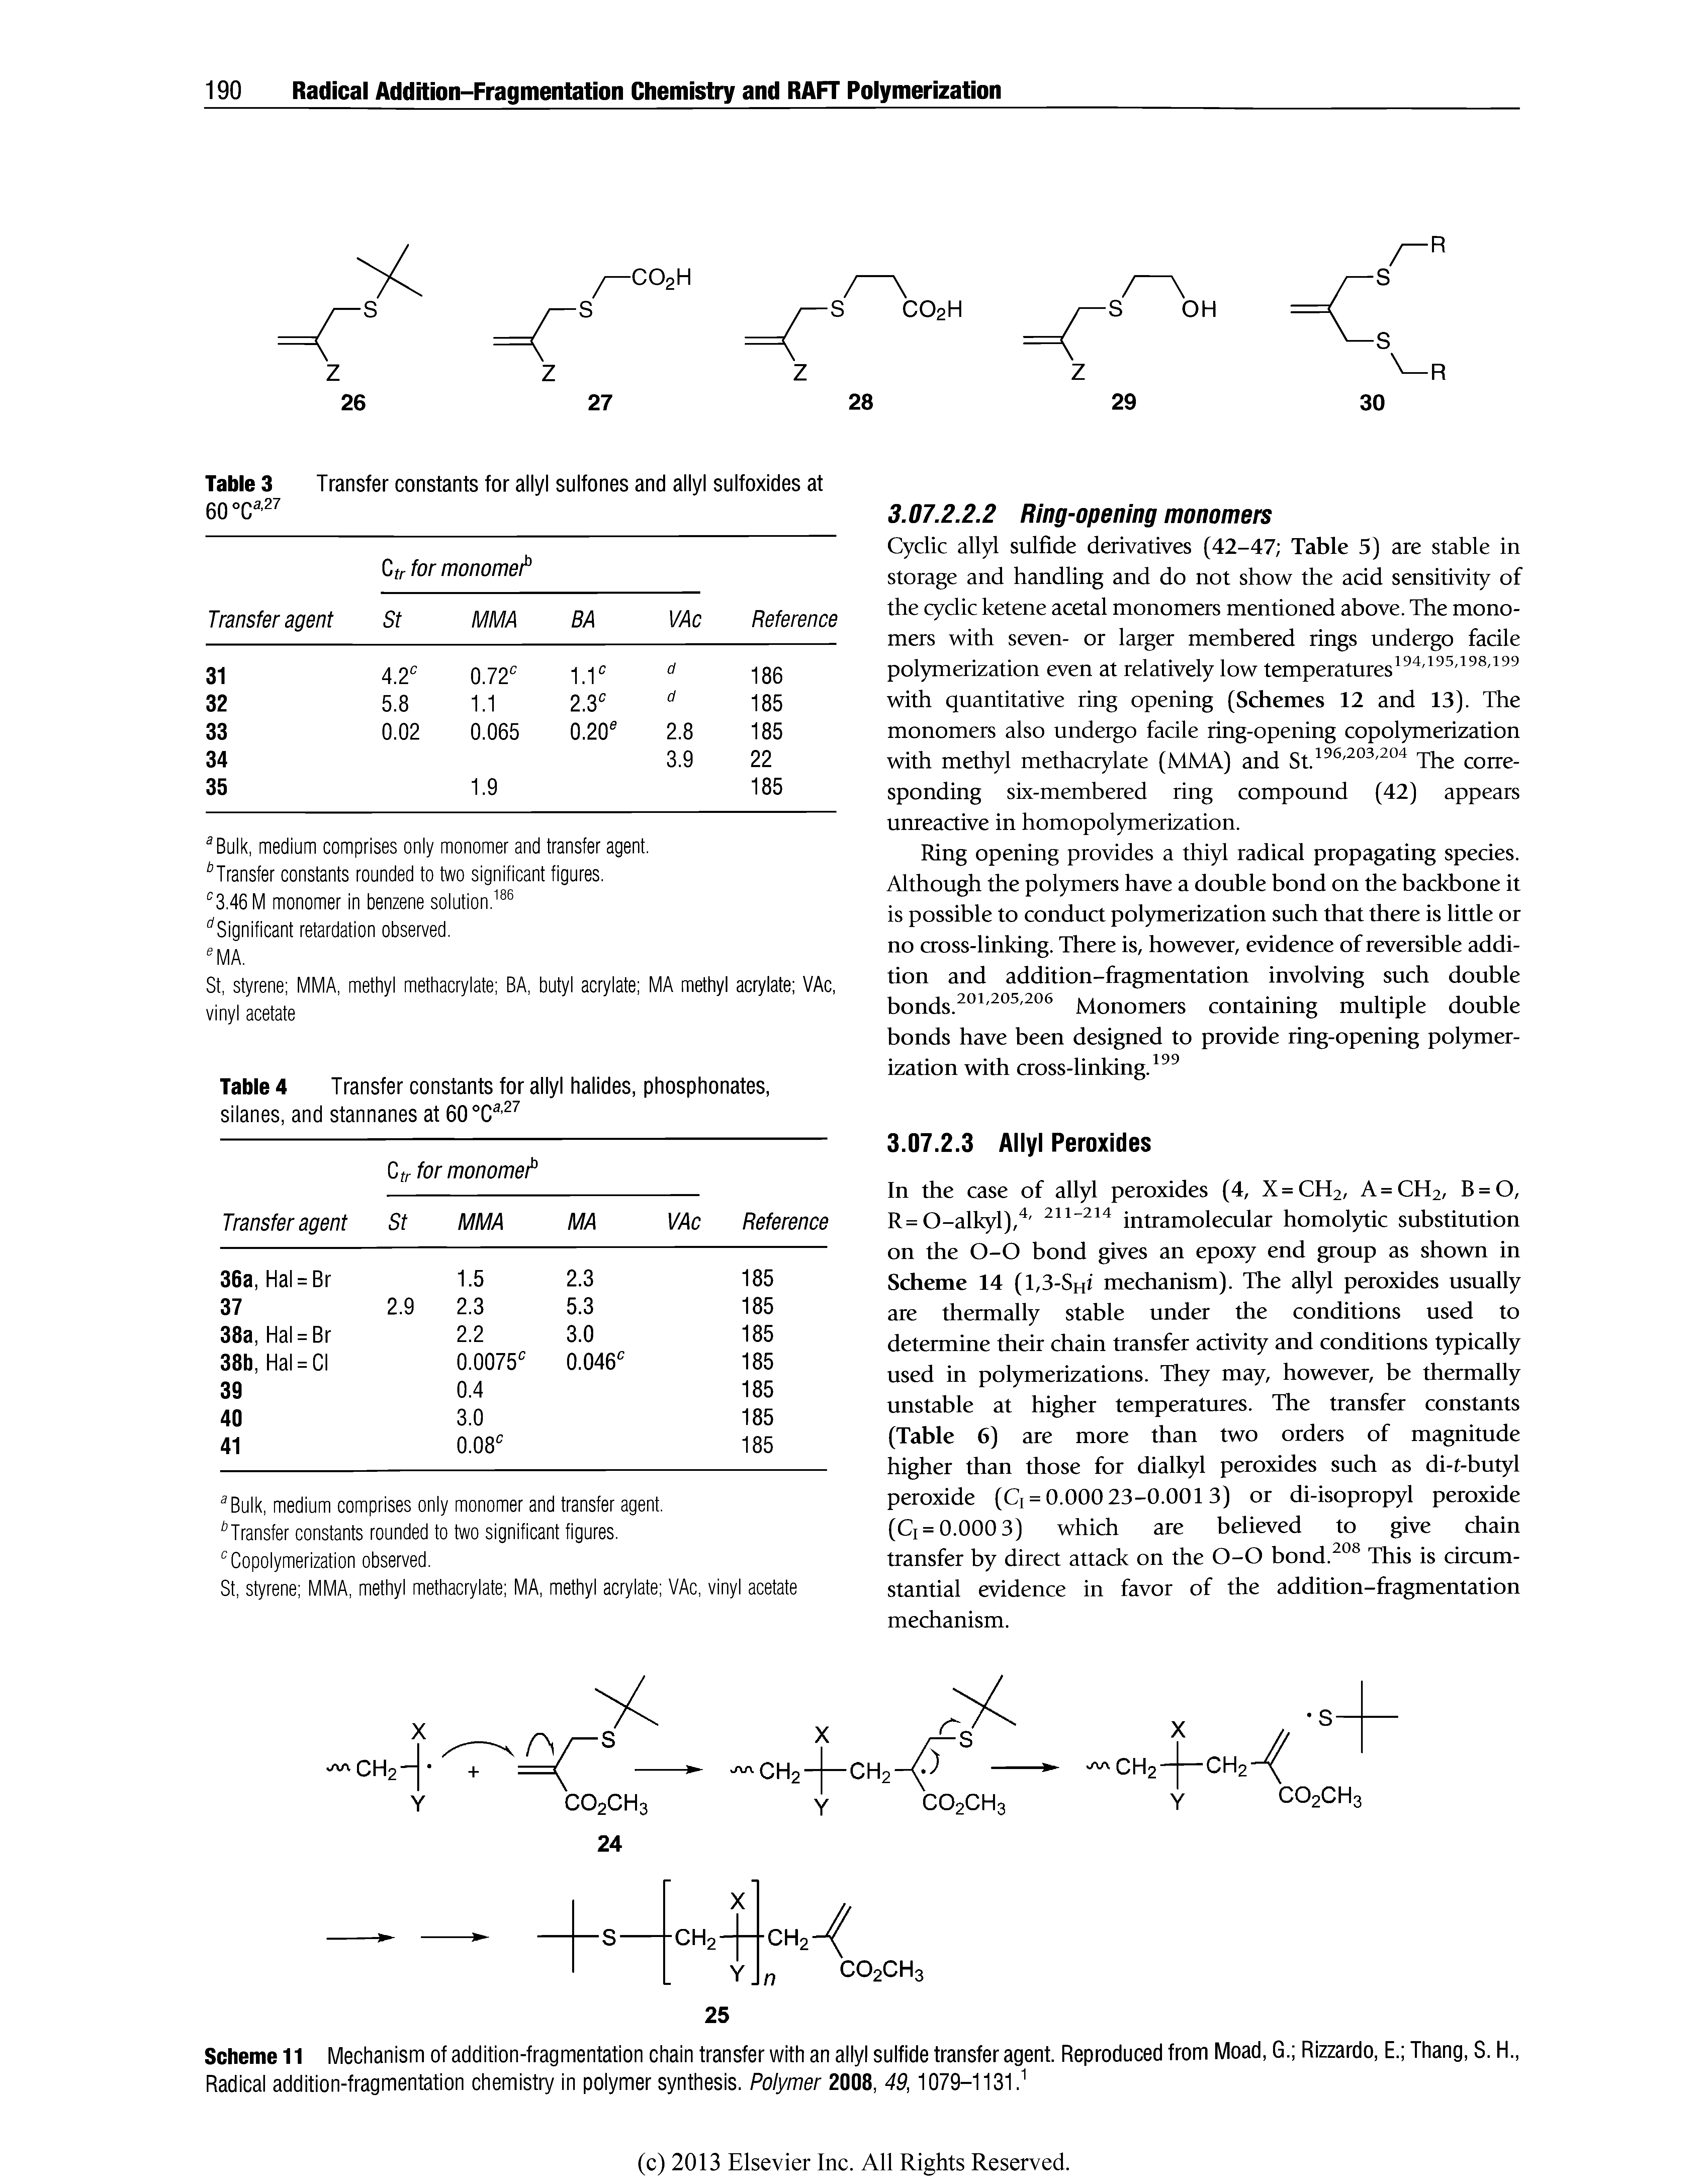 Scheme 11 Mechanism of addition-fragmentation chain transfer with an allyl sulfide transfer agent. Reproduced from Moad, G. Rizzardo, E. Thang, S. H., Radical addition-fragmentation chemistry in polymer synthesis. Polymer 2008, 49,1079-1131." ...